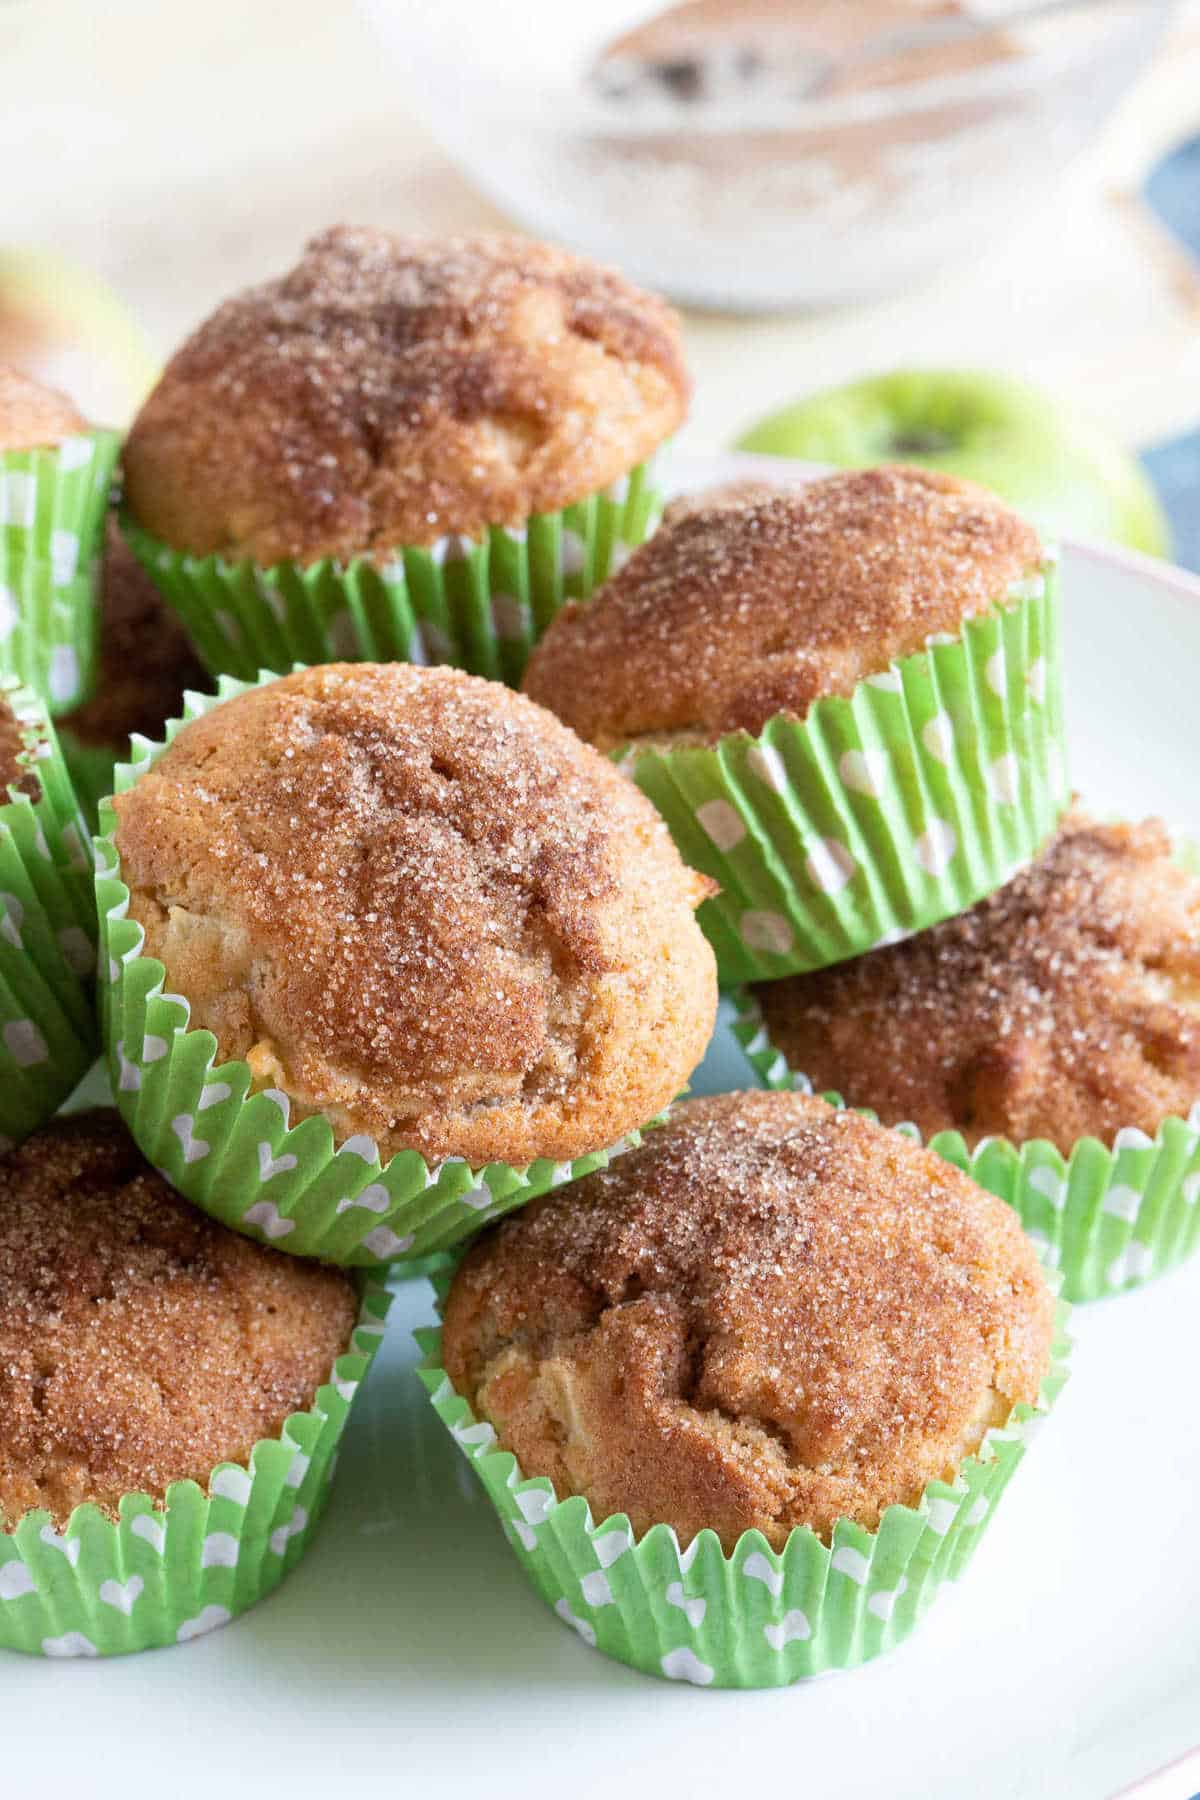 Apple & cinnamon muffins on a cake stand.